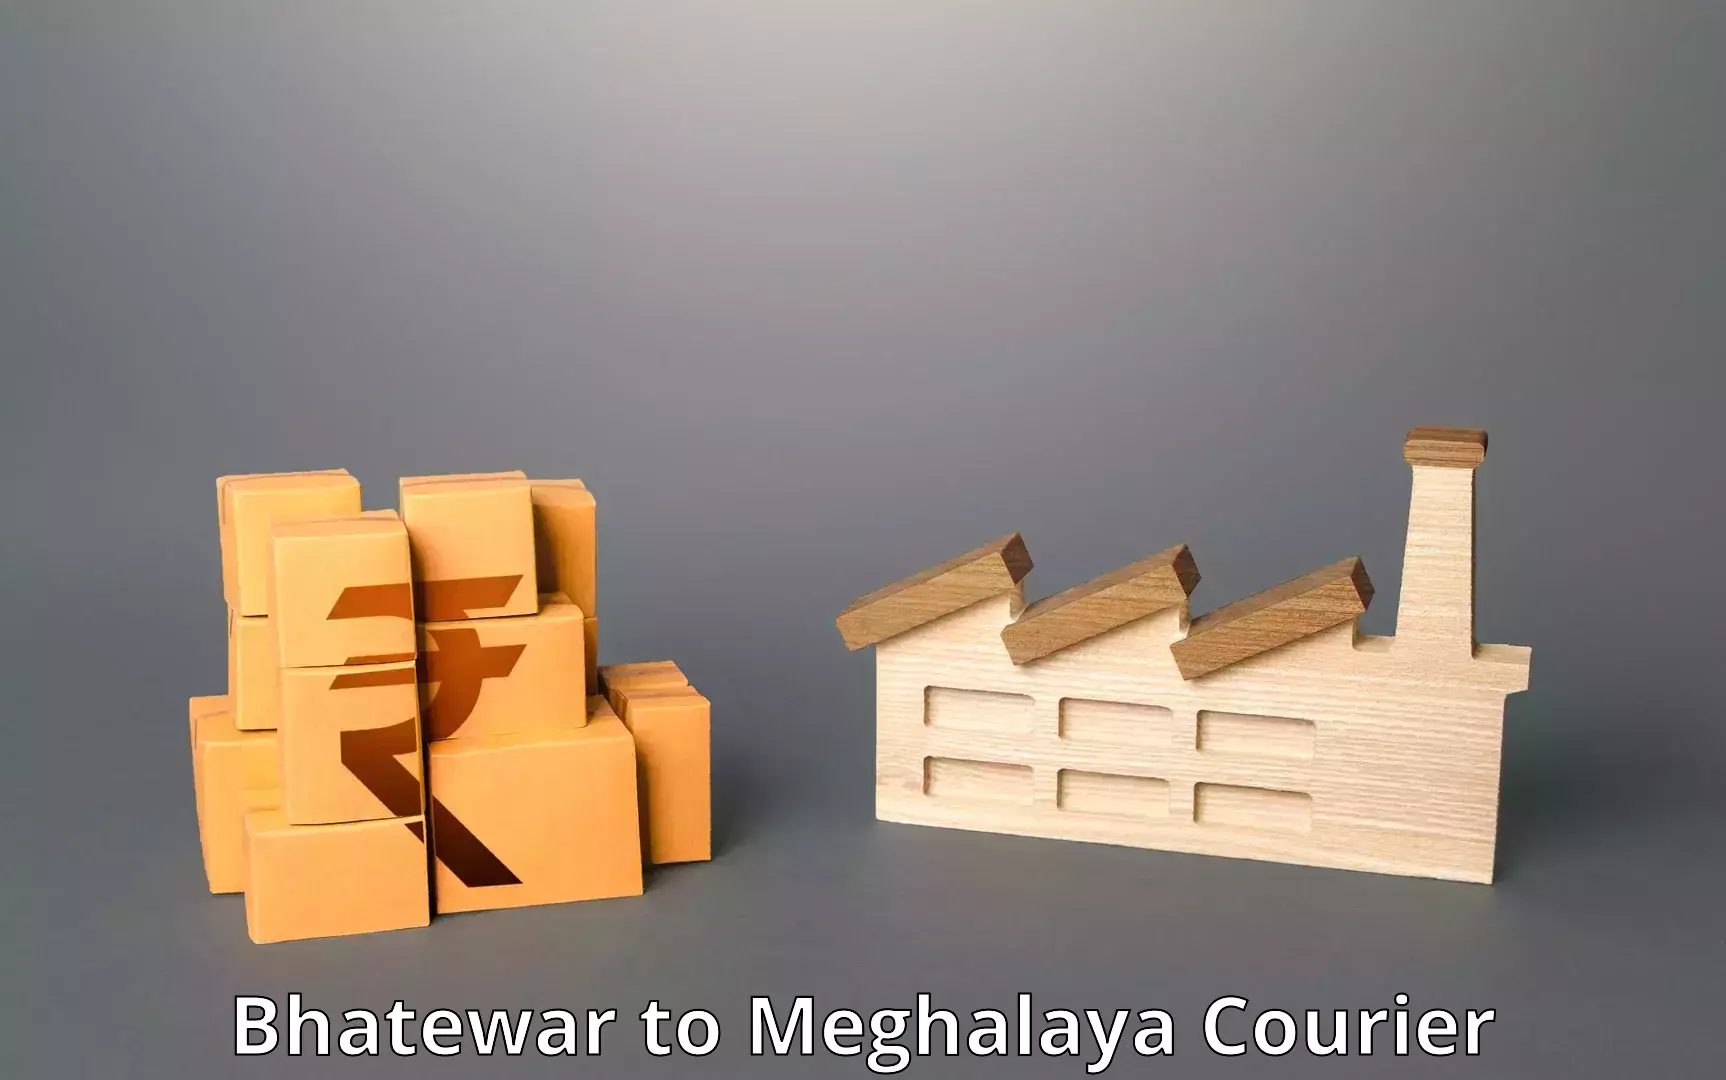 Full-service courier options Bhatewar to Meghalaya